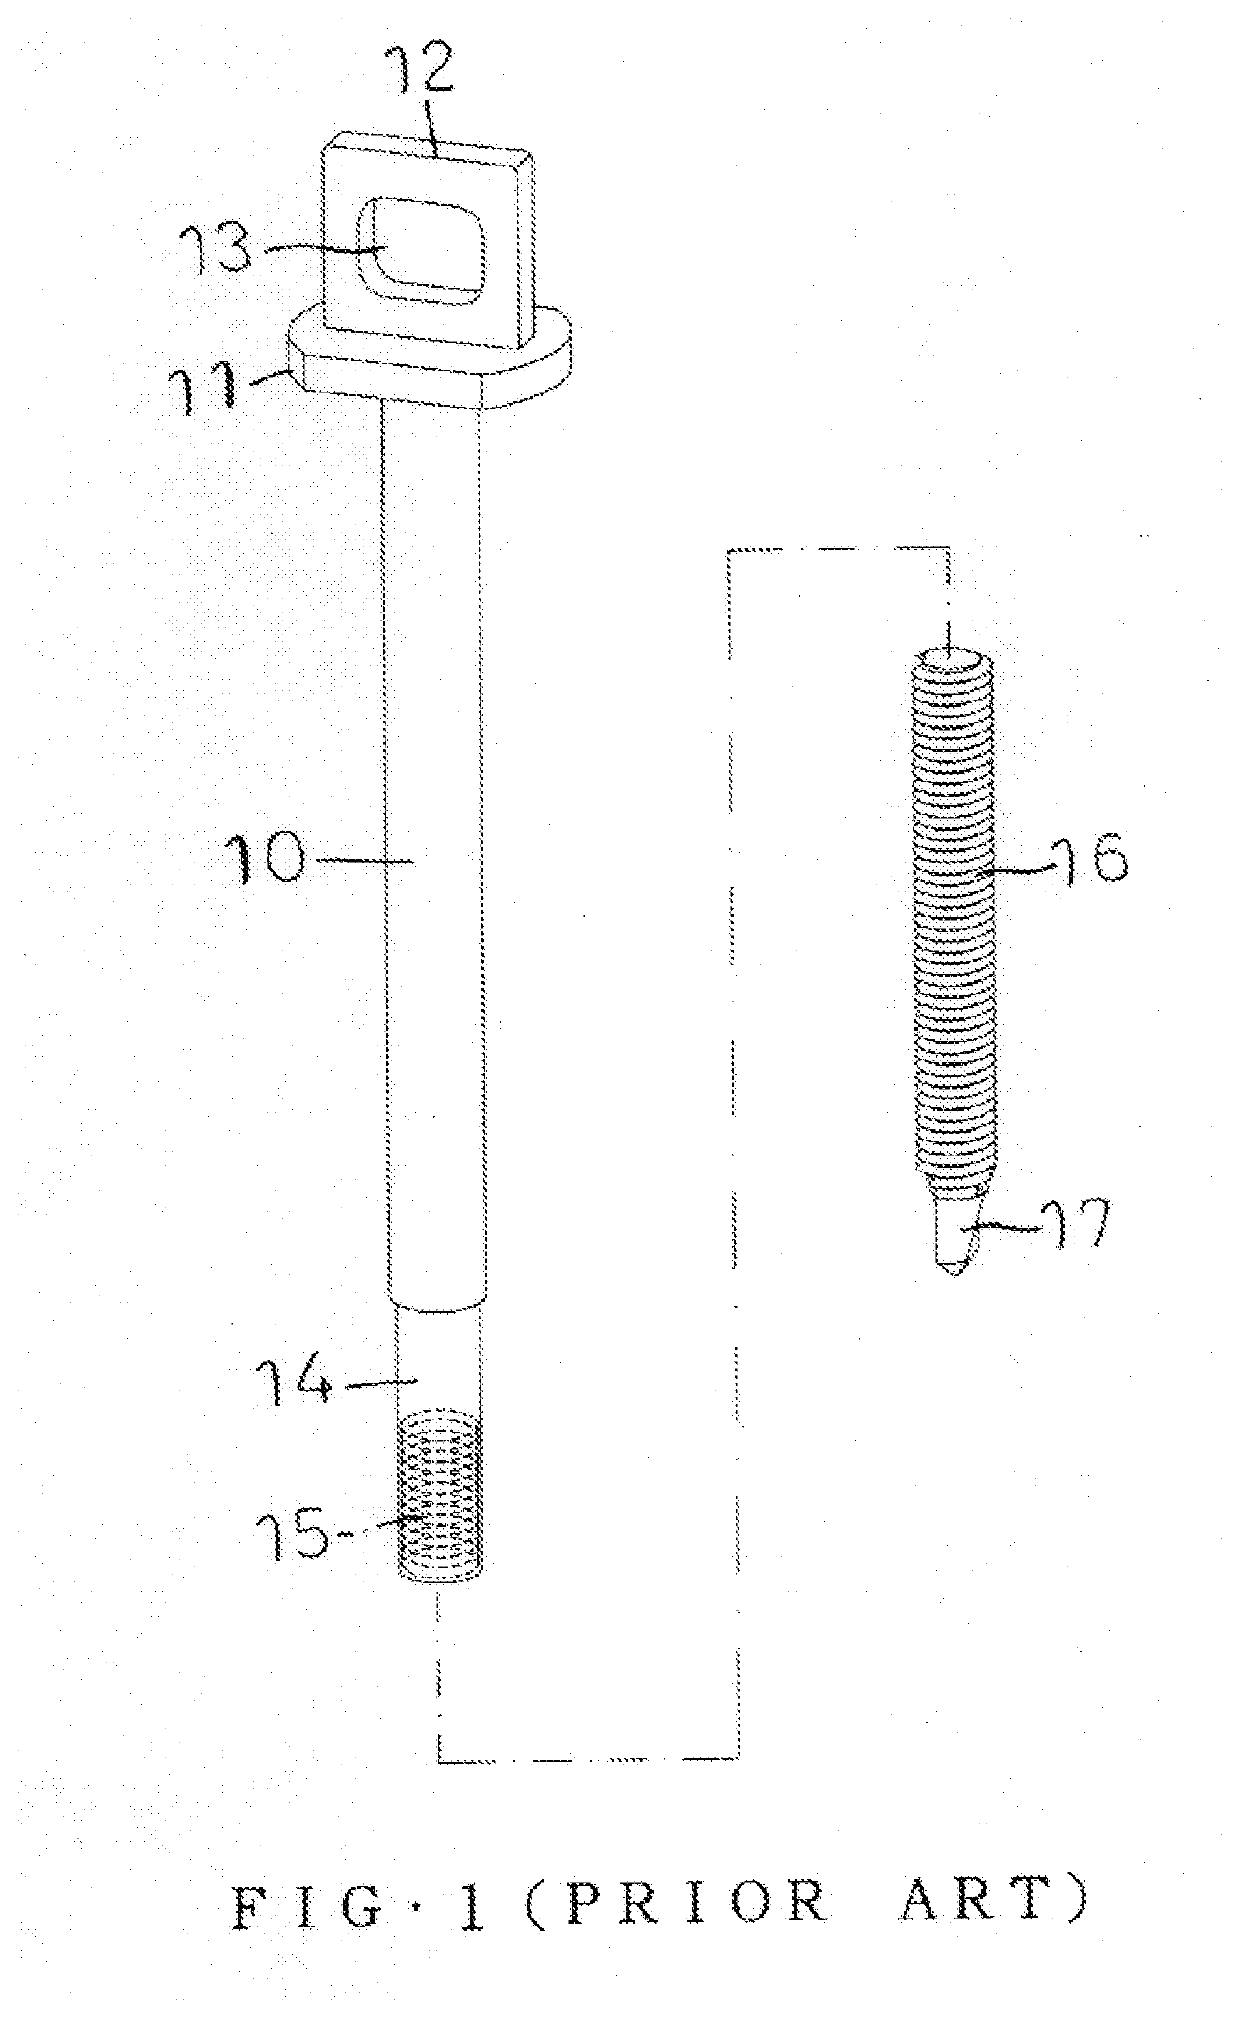 Self-Tapping Screw With Stop Flange That is Formed by Threading Die